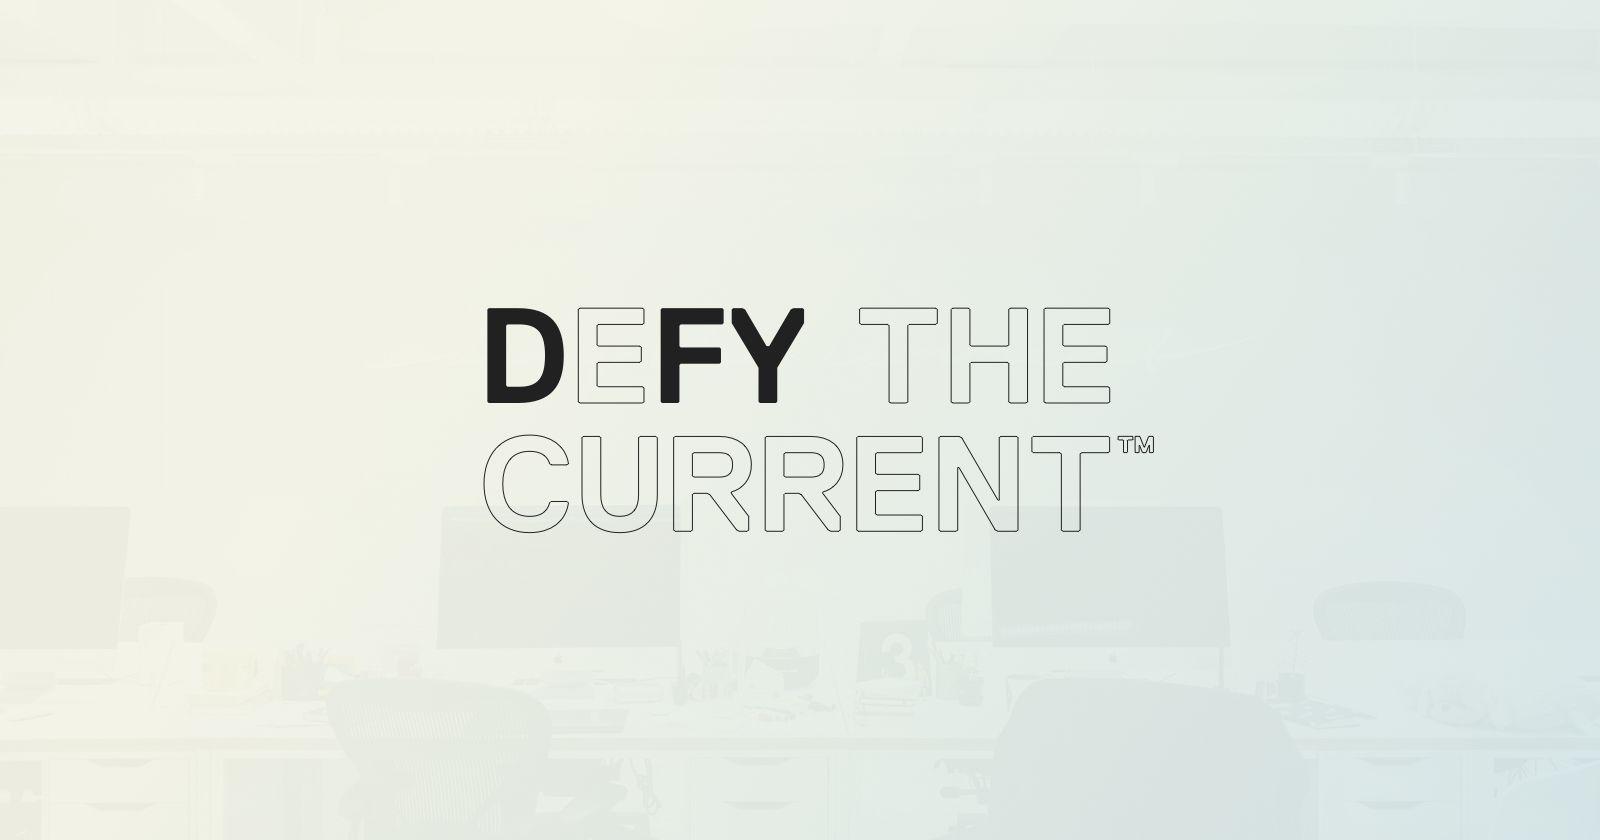 FY Logo - D.FY | DEFY THE CURRENT™